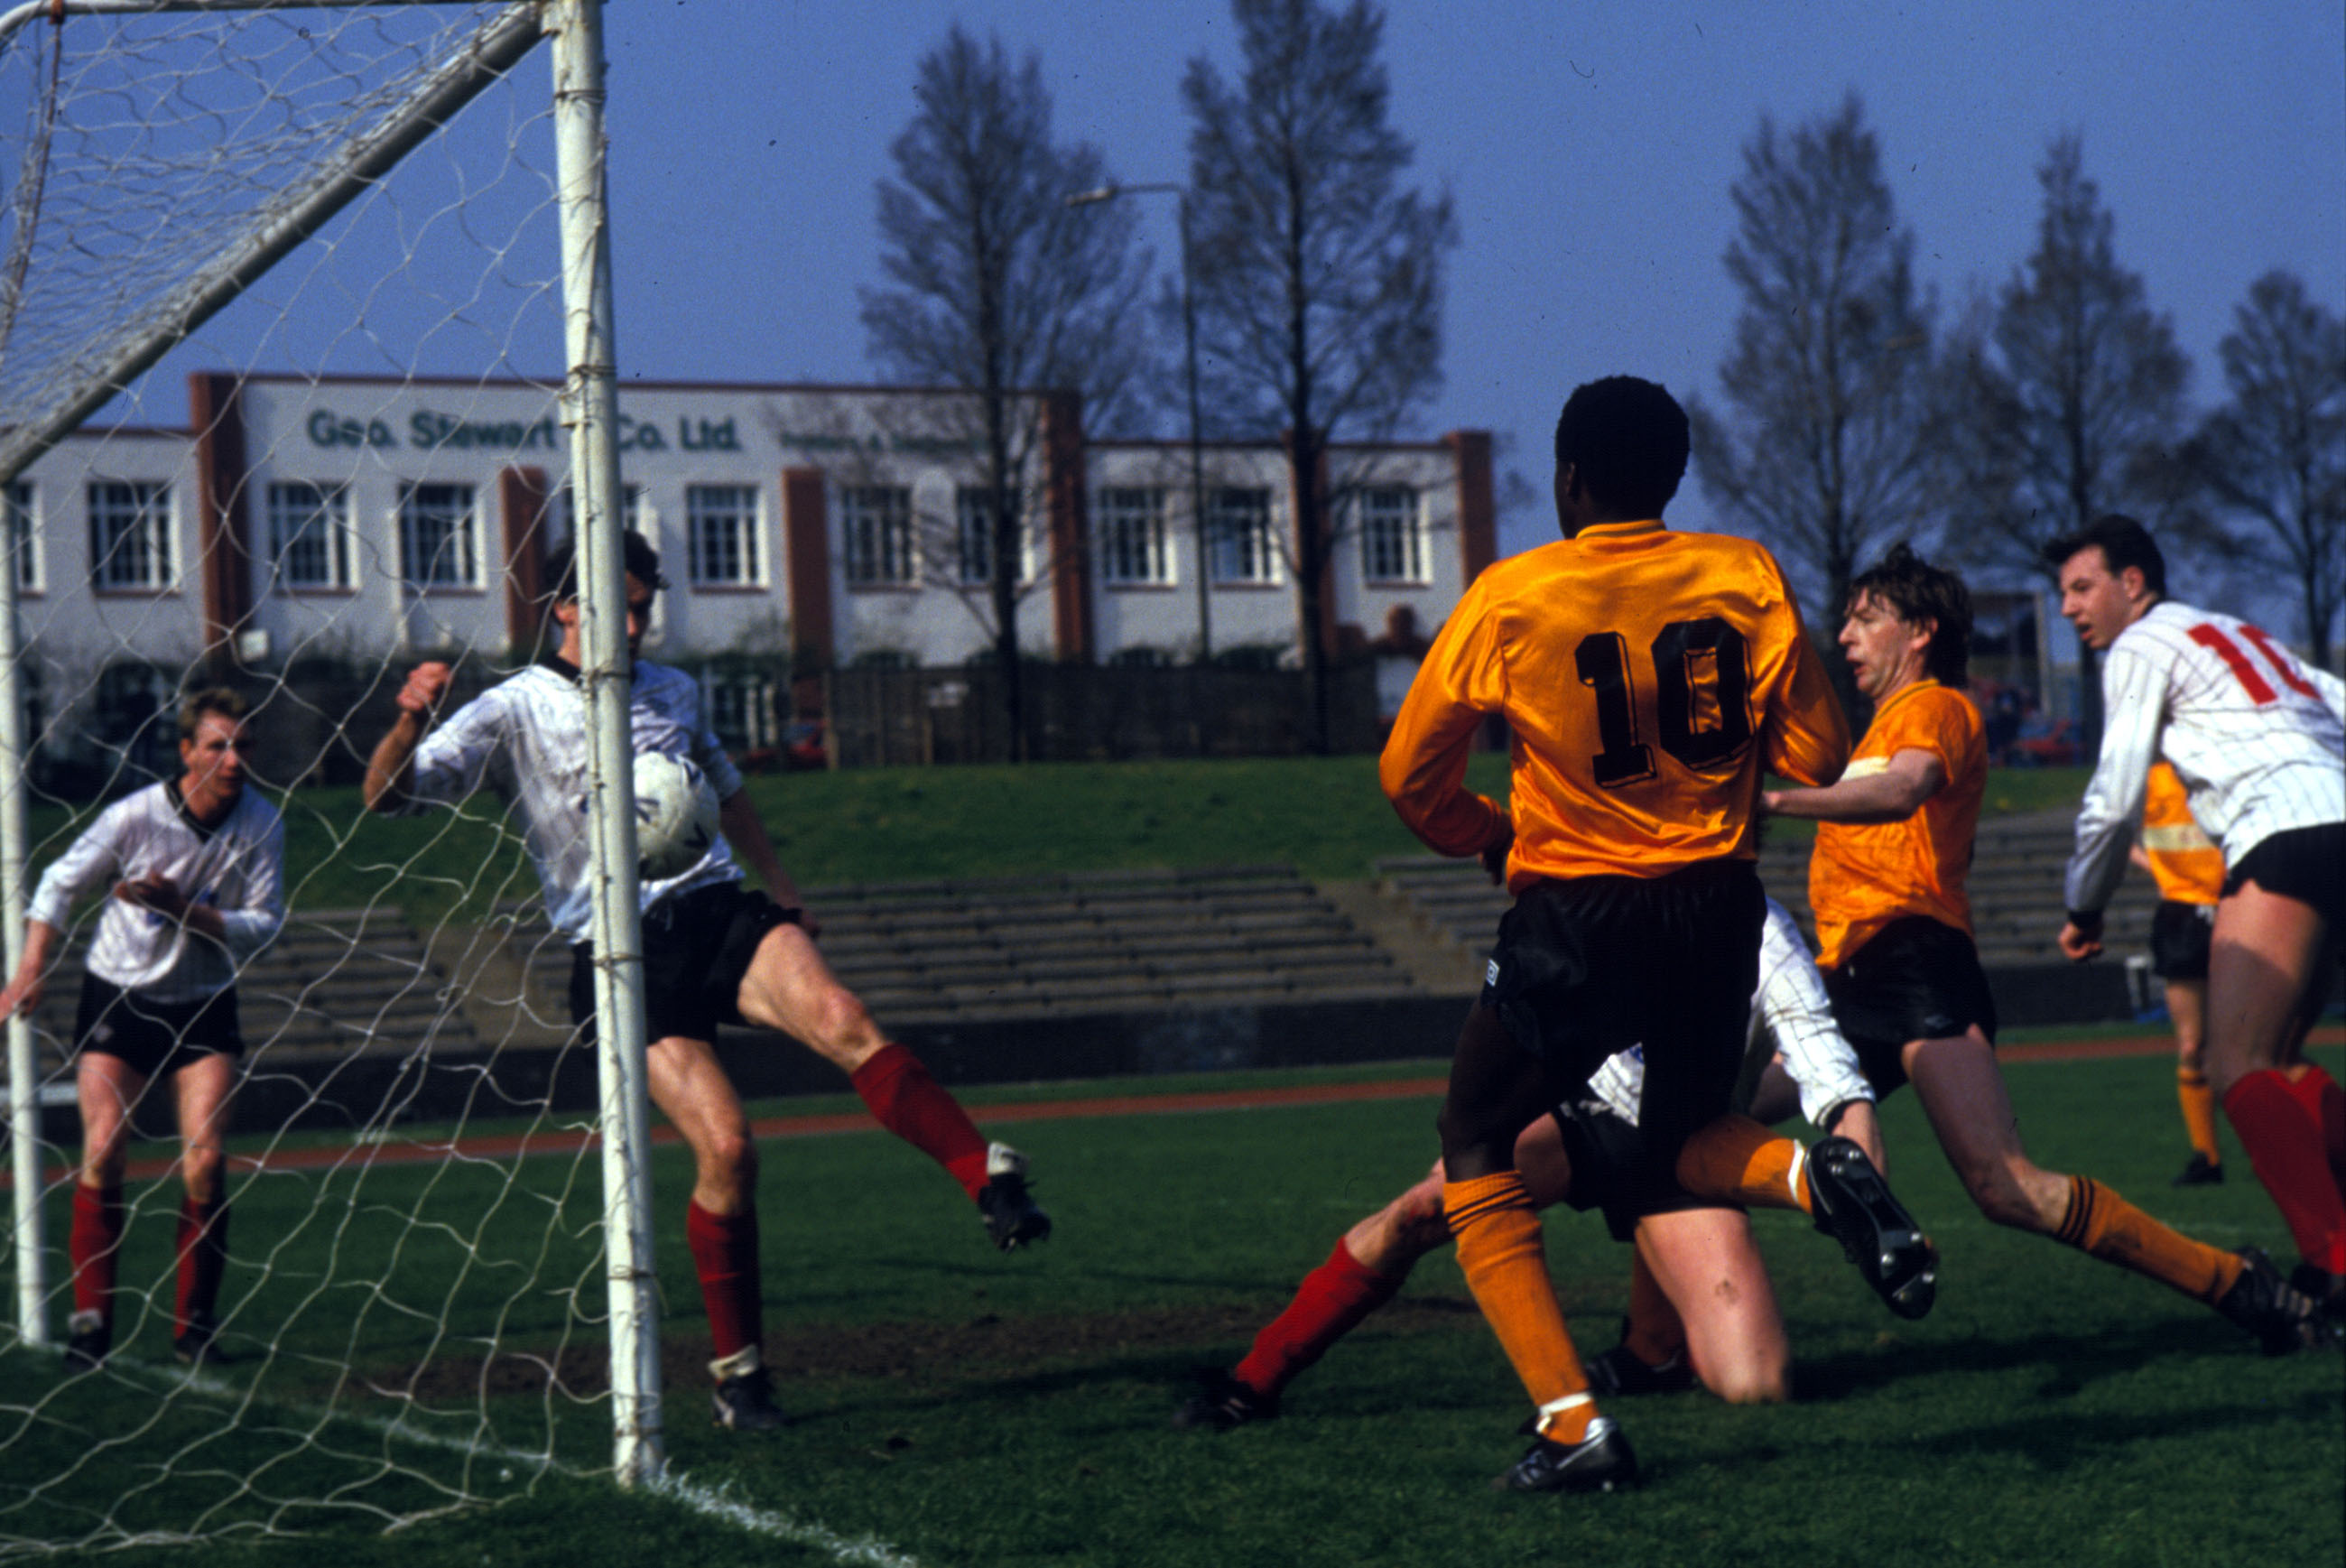 Victor Kasule (wearing number 10) scores a promotion-winning goal for Meadowbank Thistle against East Stirling in 1987.